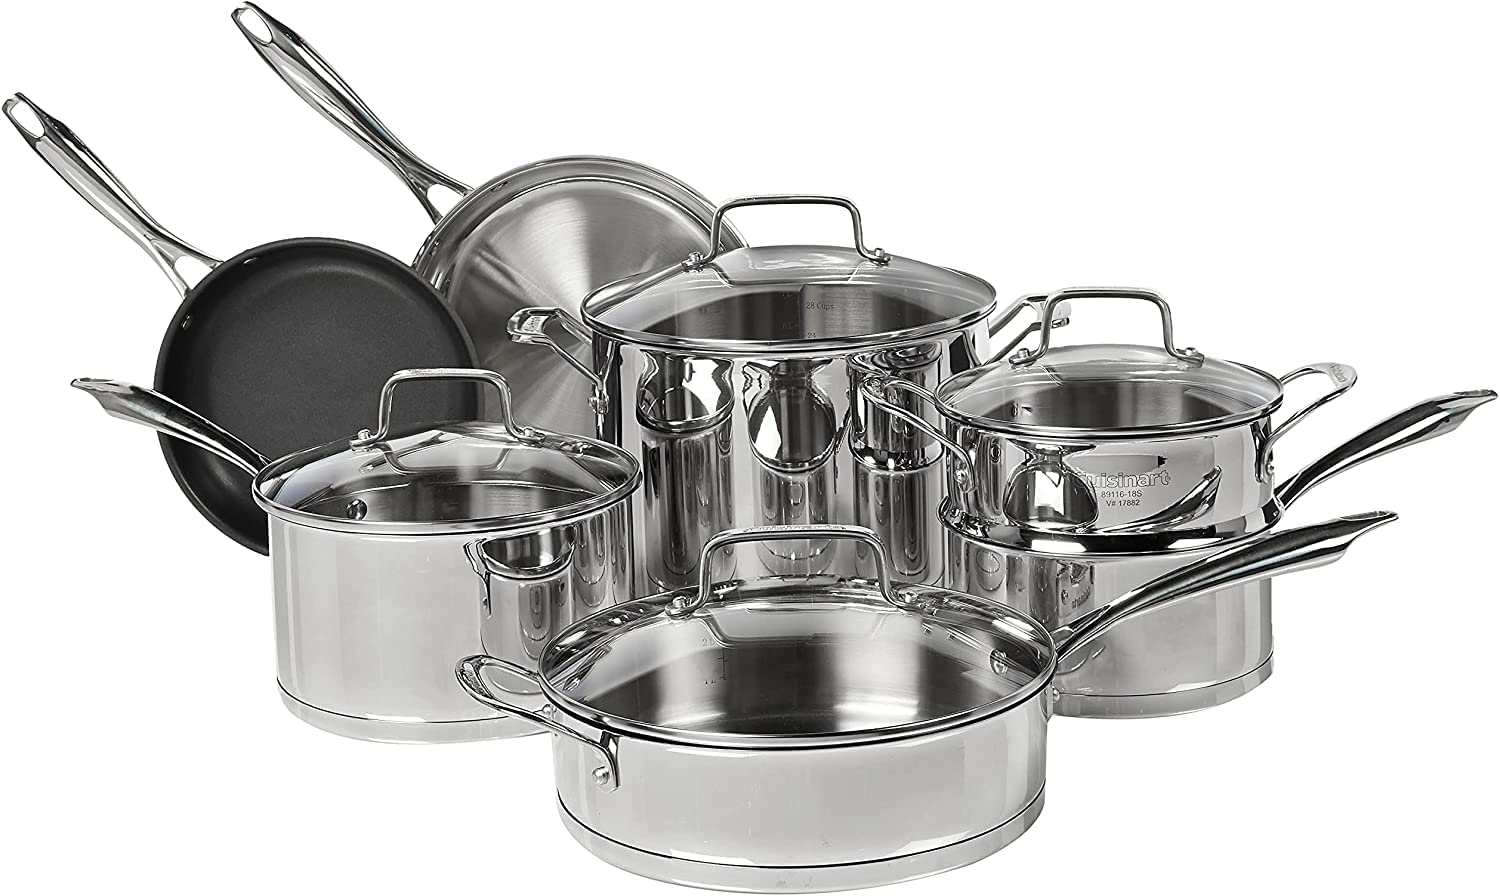 Duxtop SSIB-17 Professional 17 piece Stainless Steel Induction